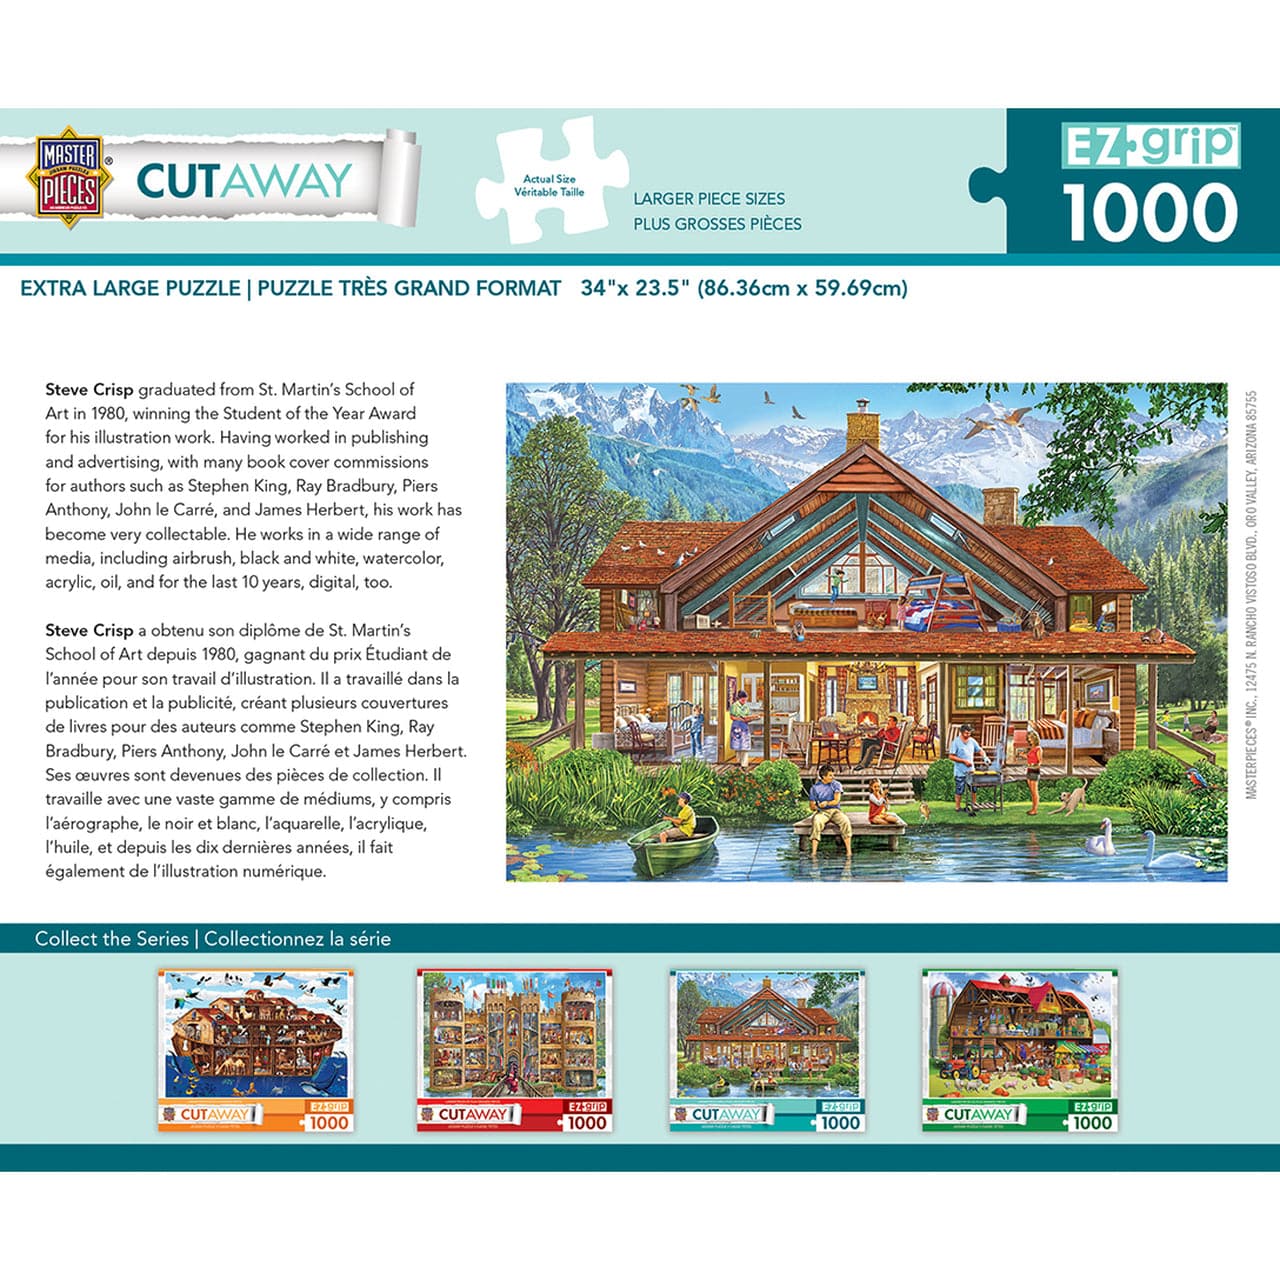 Camping Lodge 1000 Piece Jigsaw Puzzle by Masterpieces